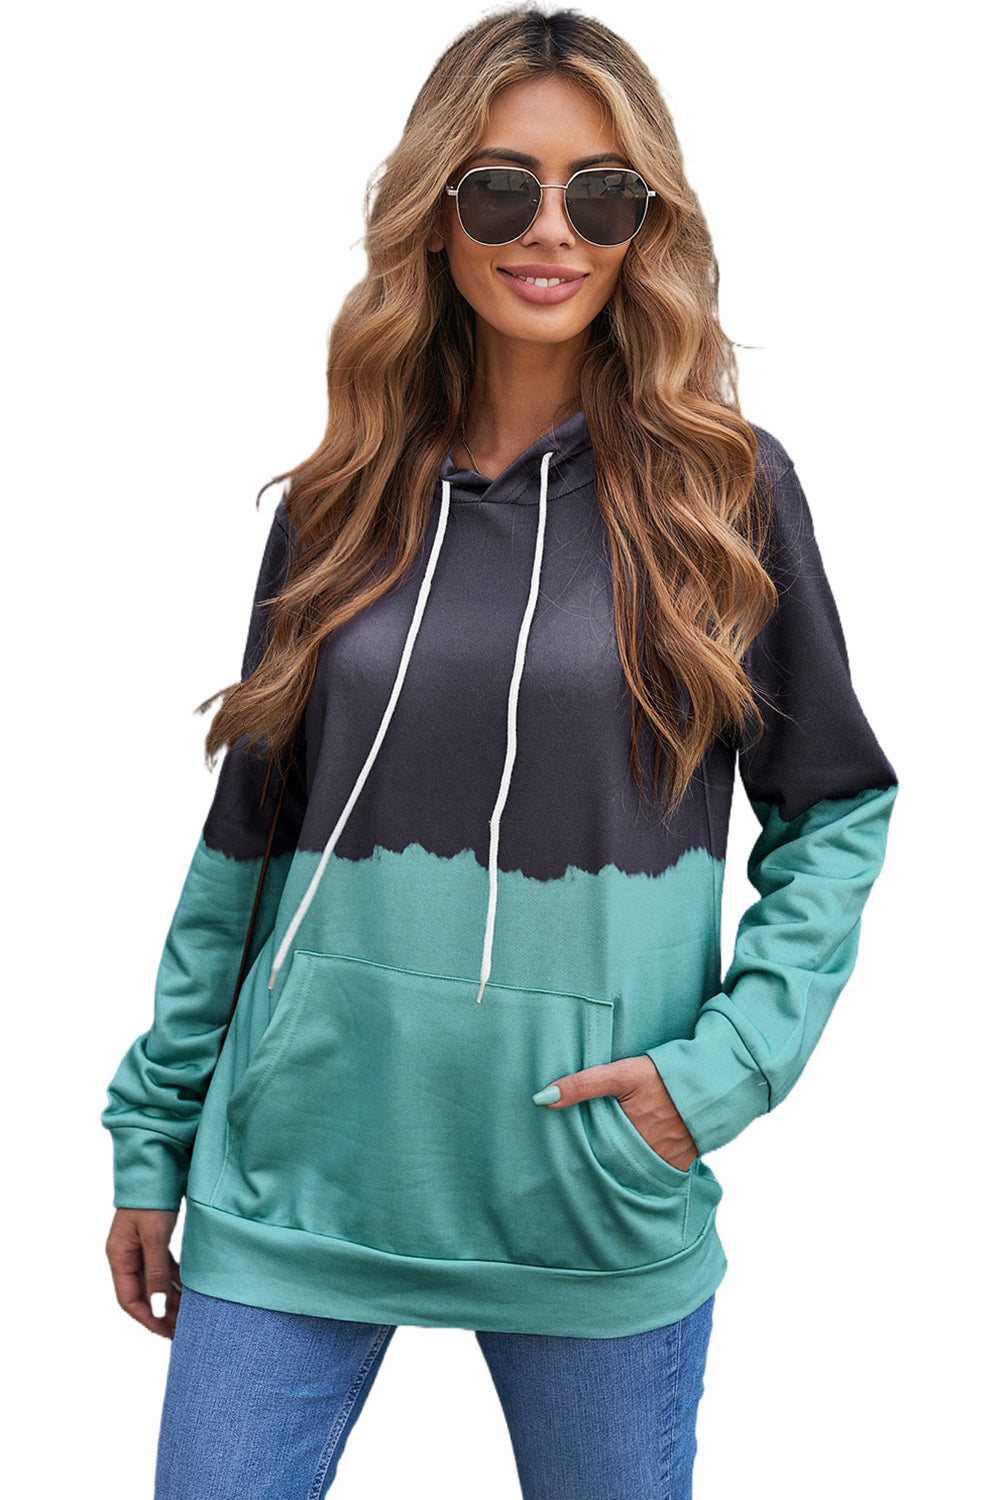 Light Green Dip-Dye Colorblock Drawstring Hoodie with Pockets